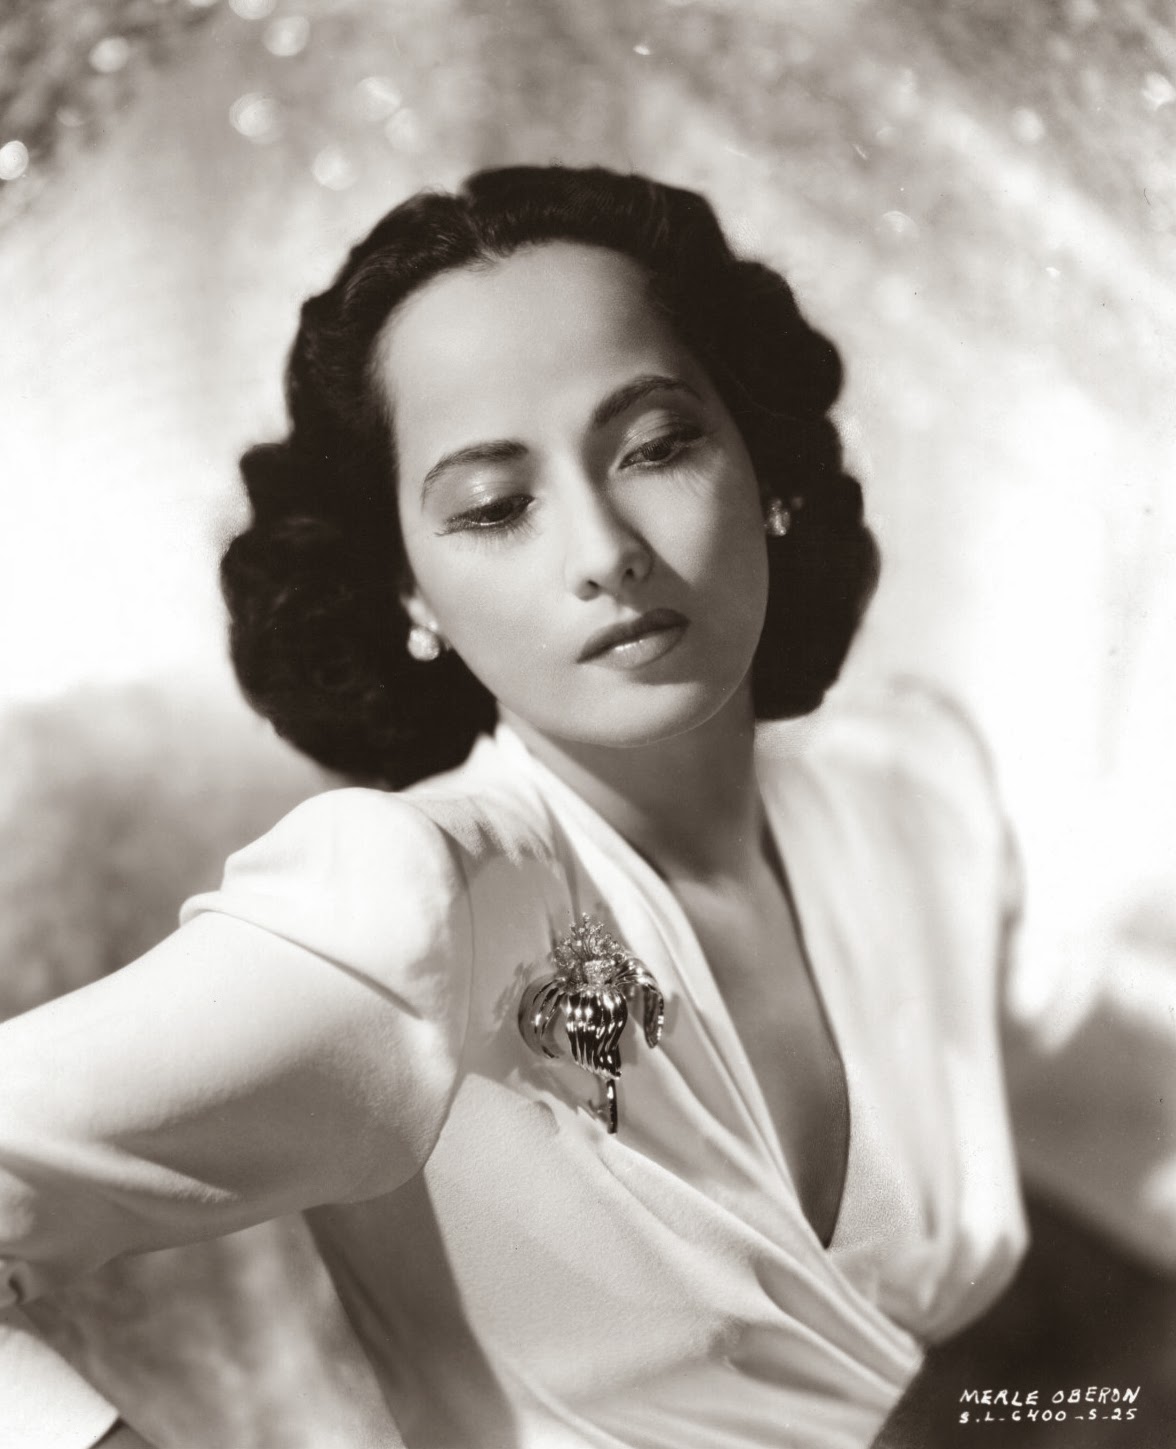 Slice of Cheesecake: Merle Oberon, pictorial